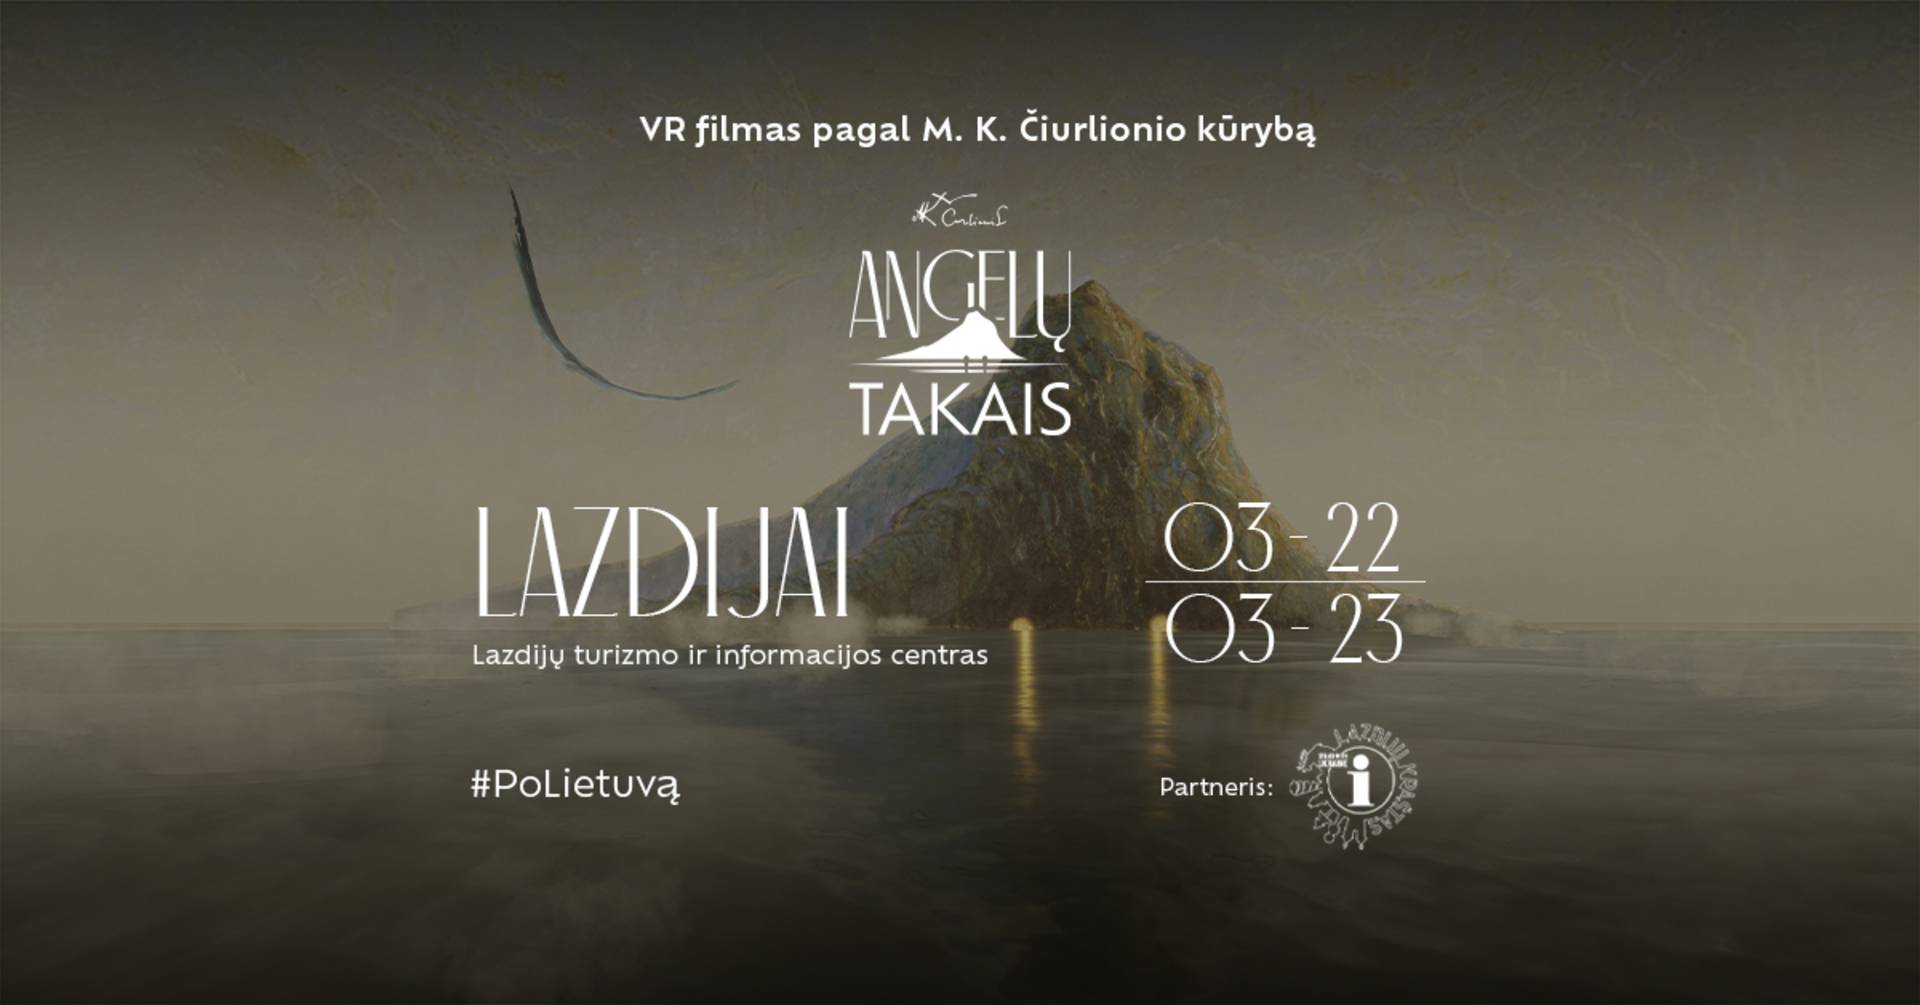 Virtual reality movie "Angels in the Paths" in Lazdijai! Based on the works of M. K. Čiurlionis